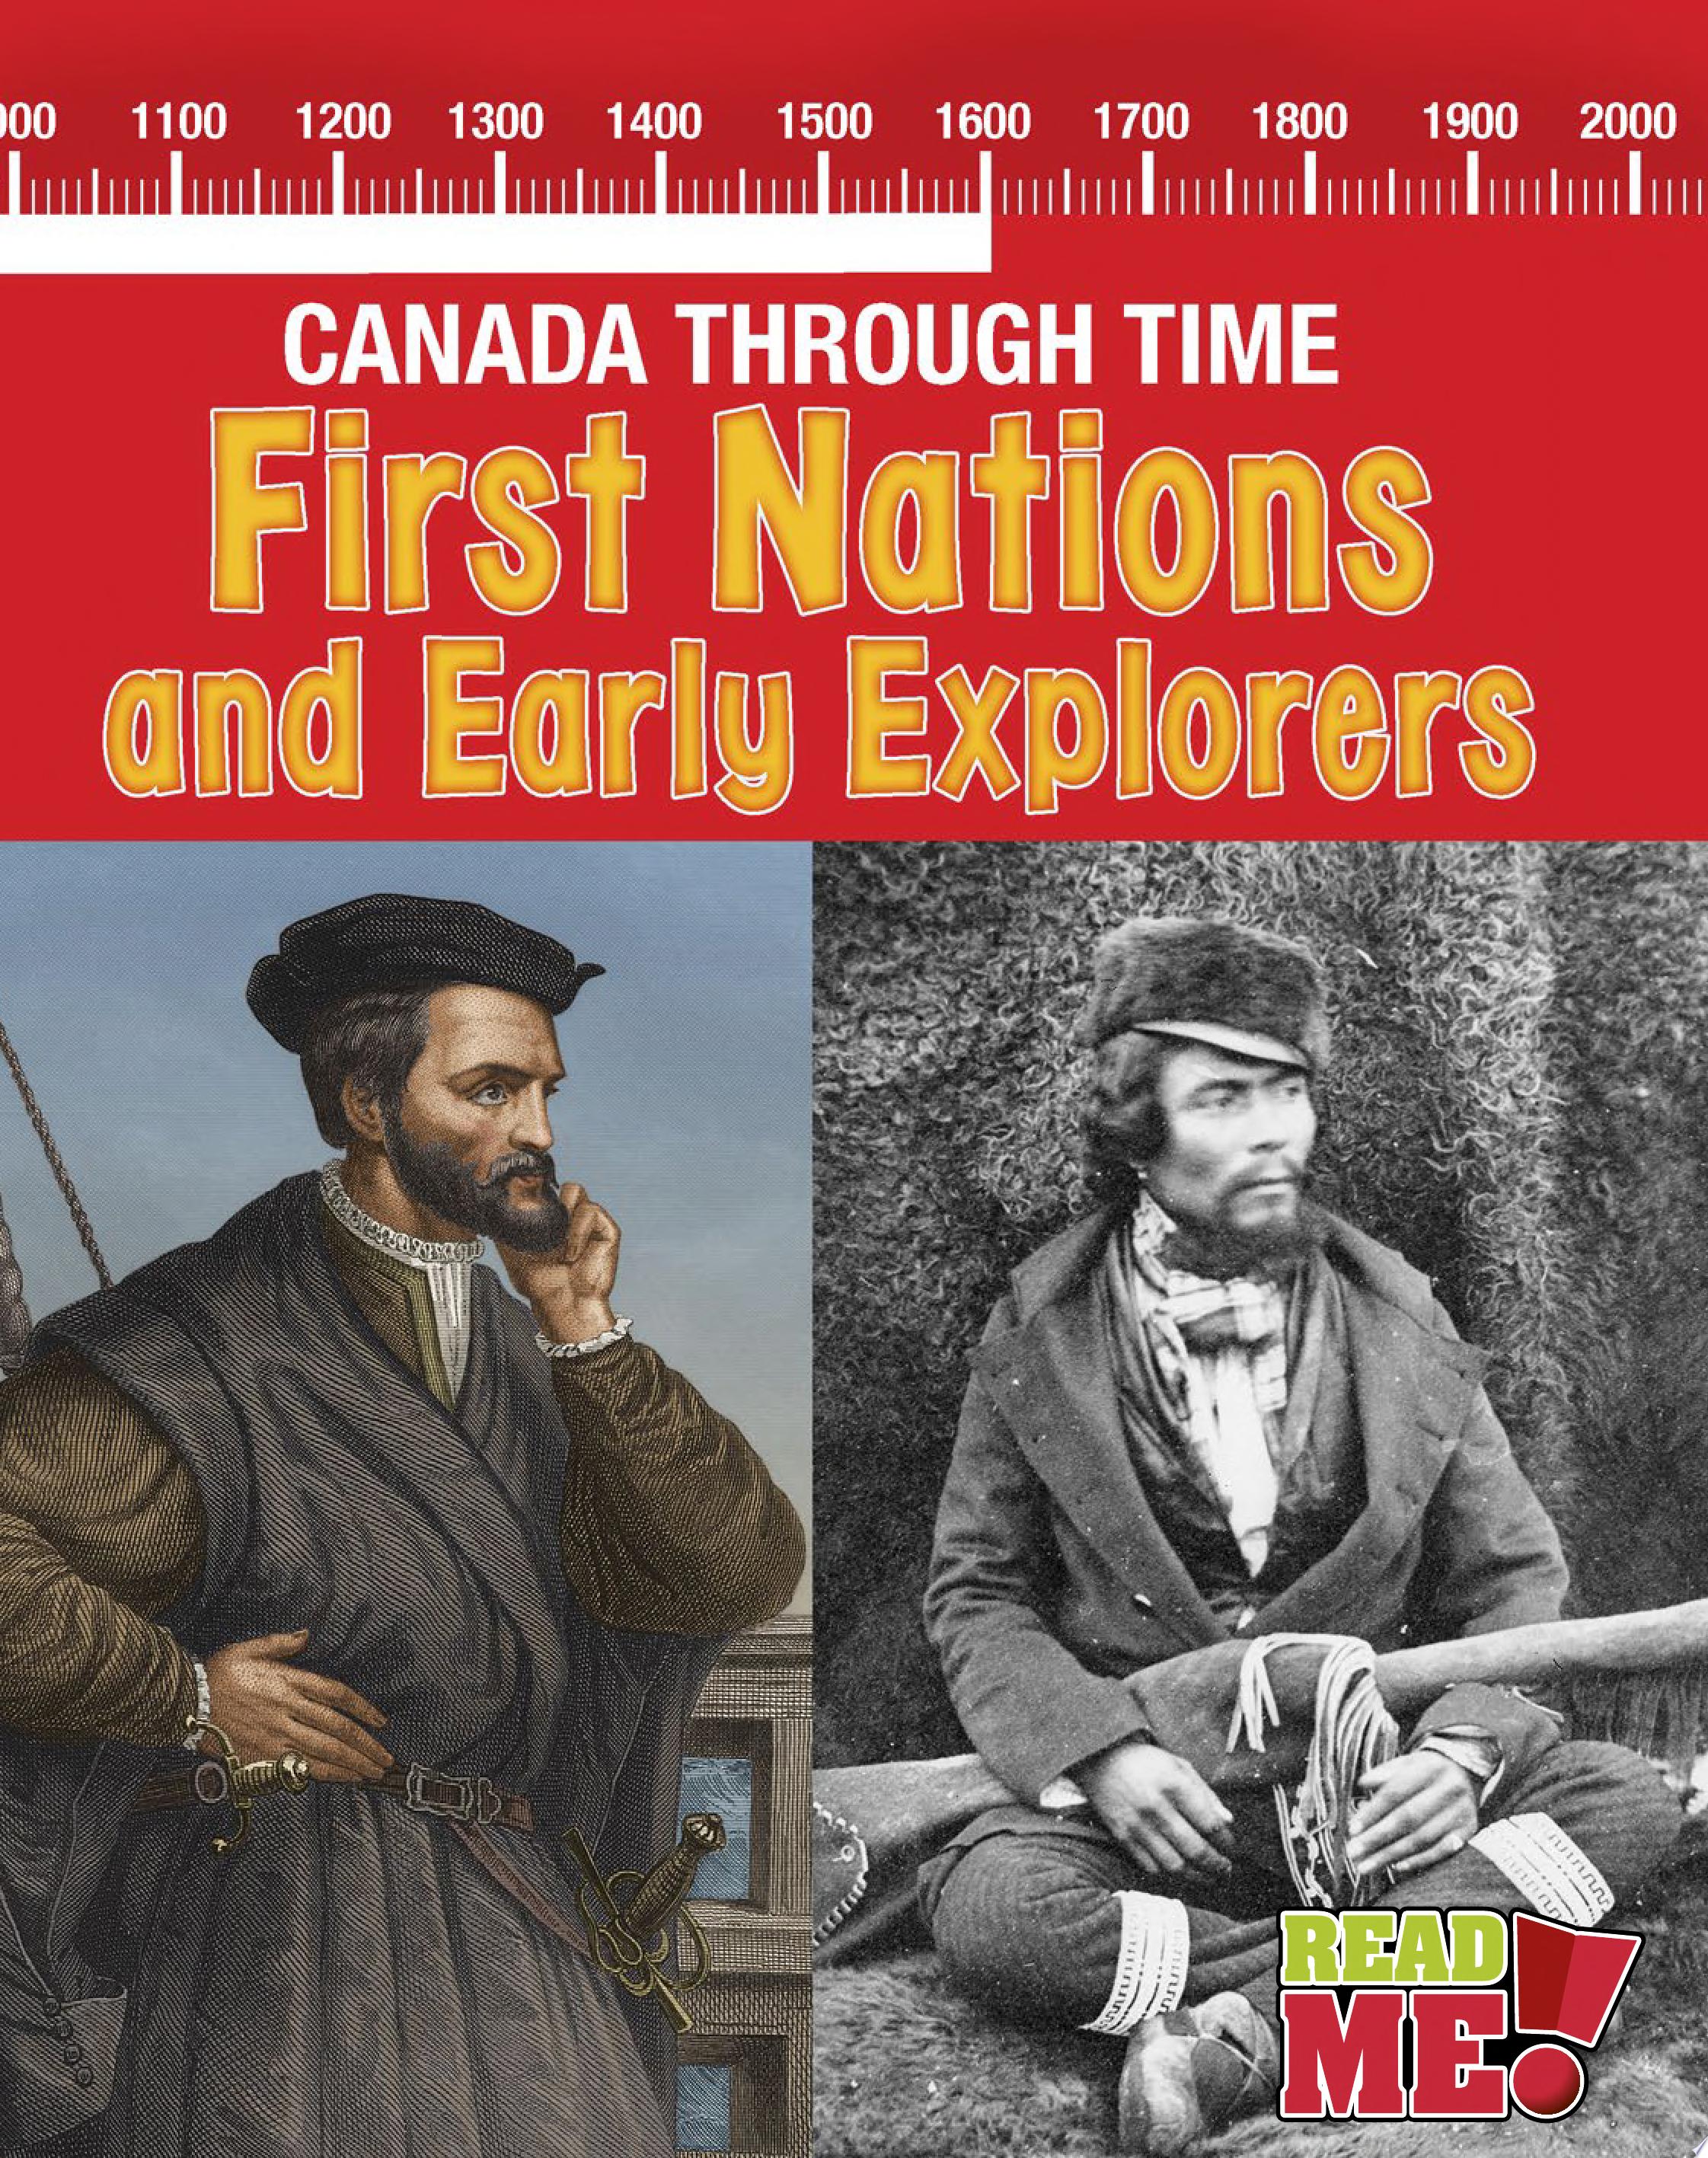 Image for "First Nations and Early Explorers"